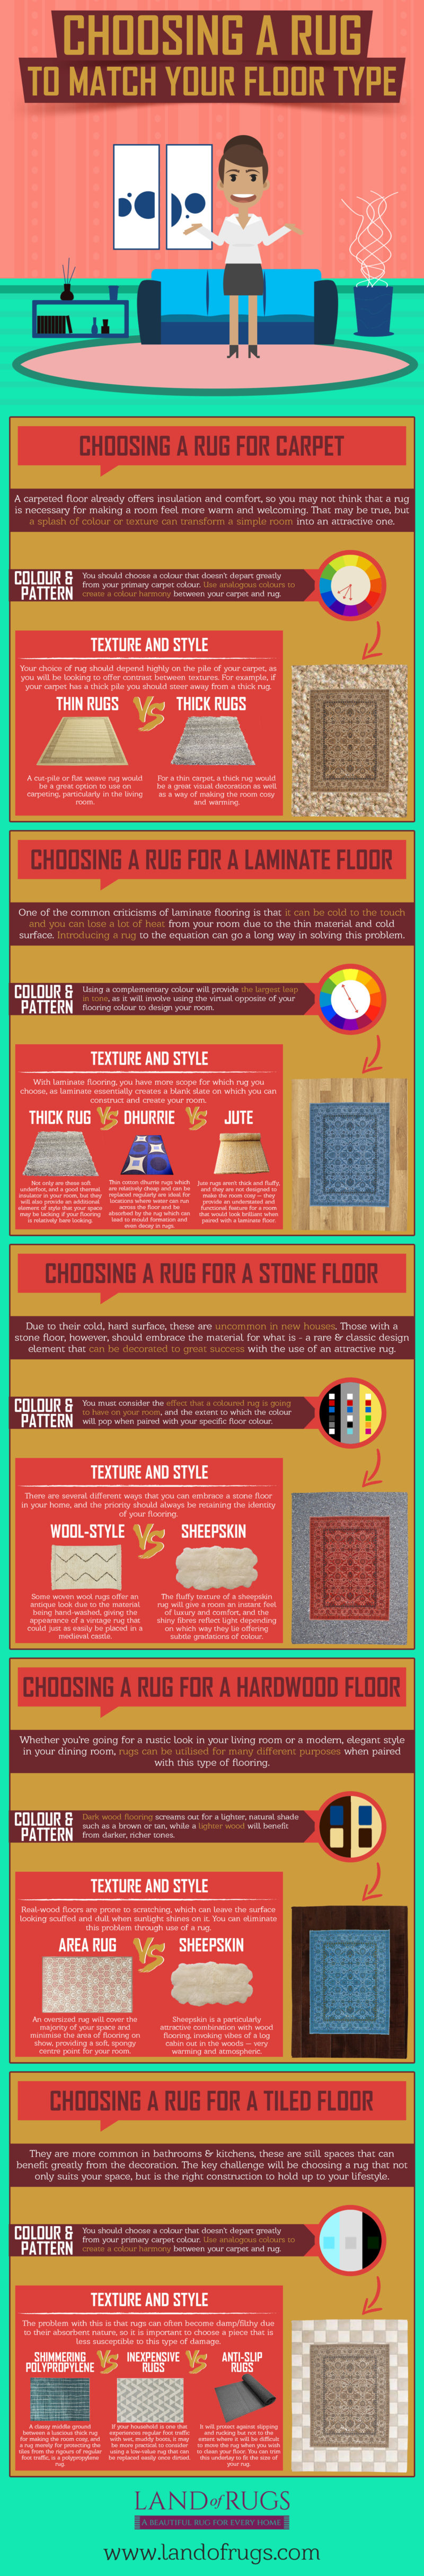 CHOOSING A RUG TO MATCH YOUR FLOOR TYPE